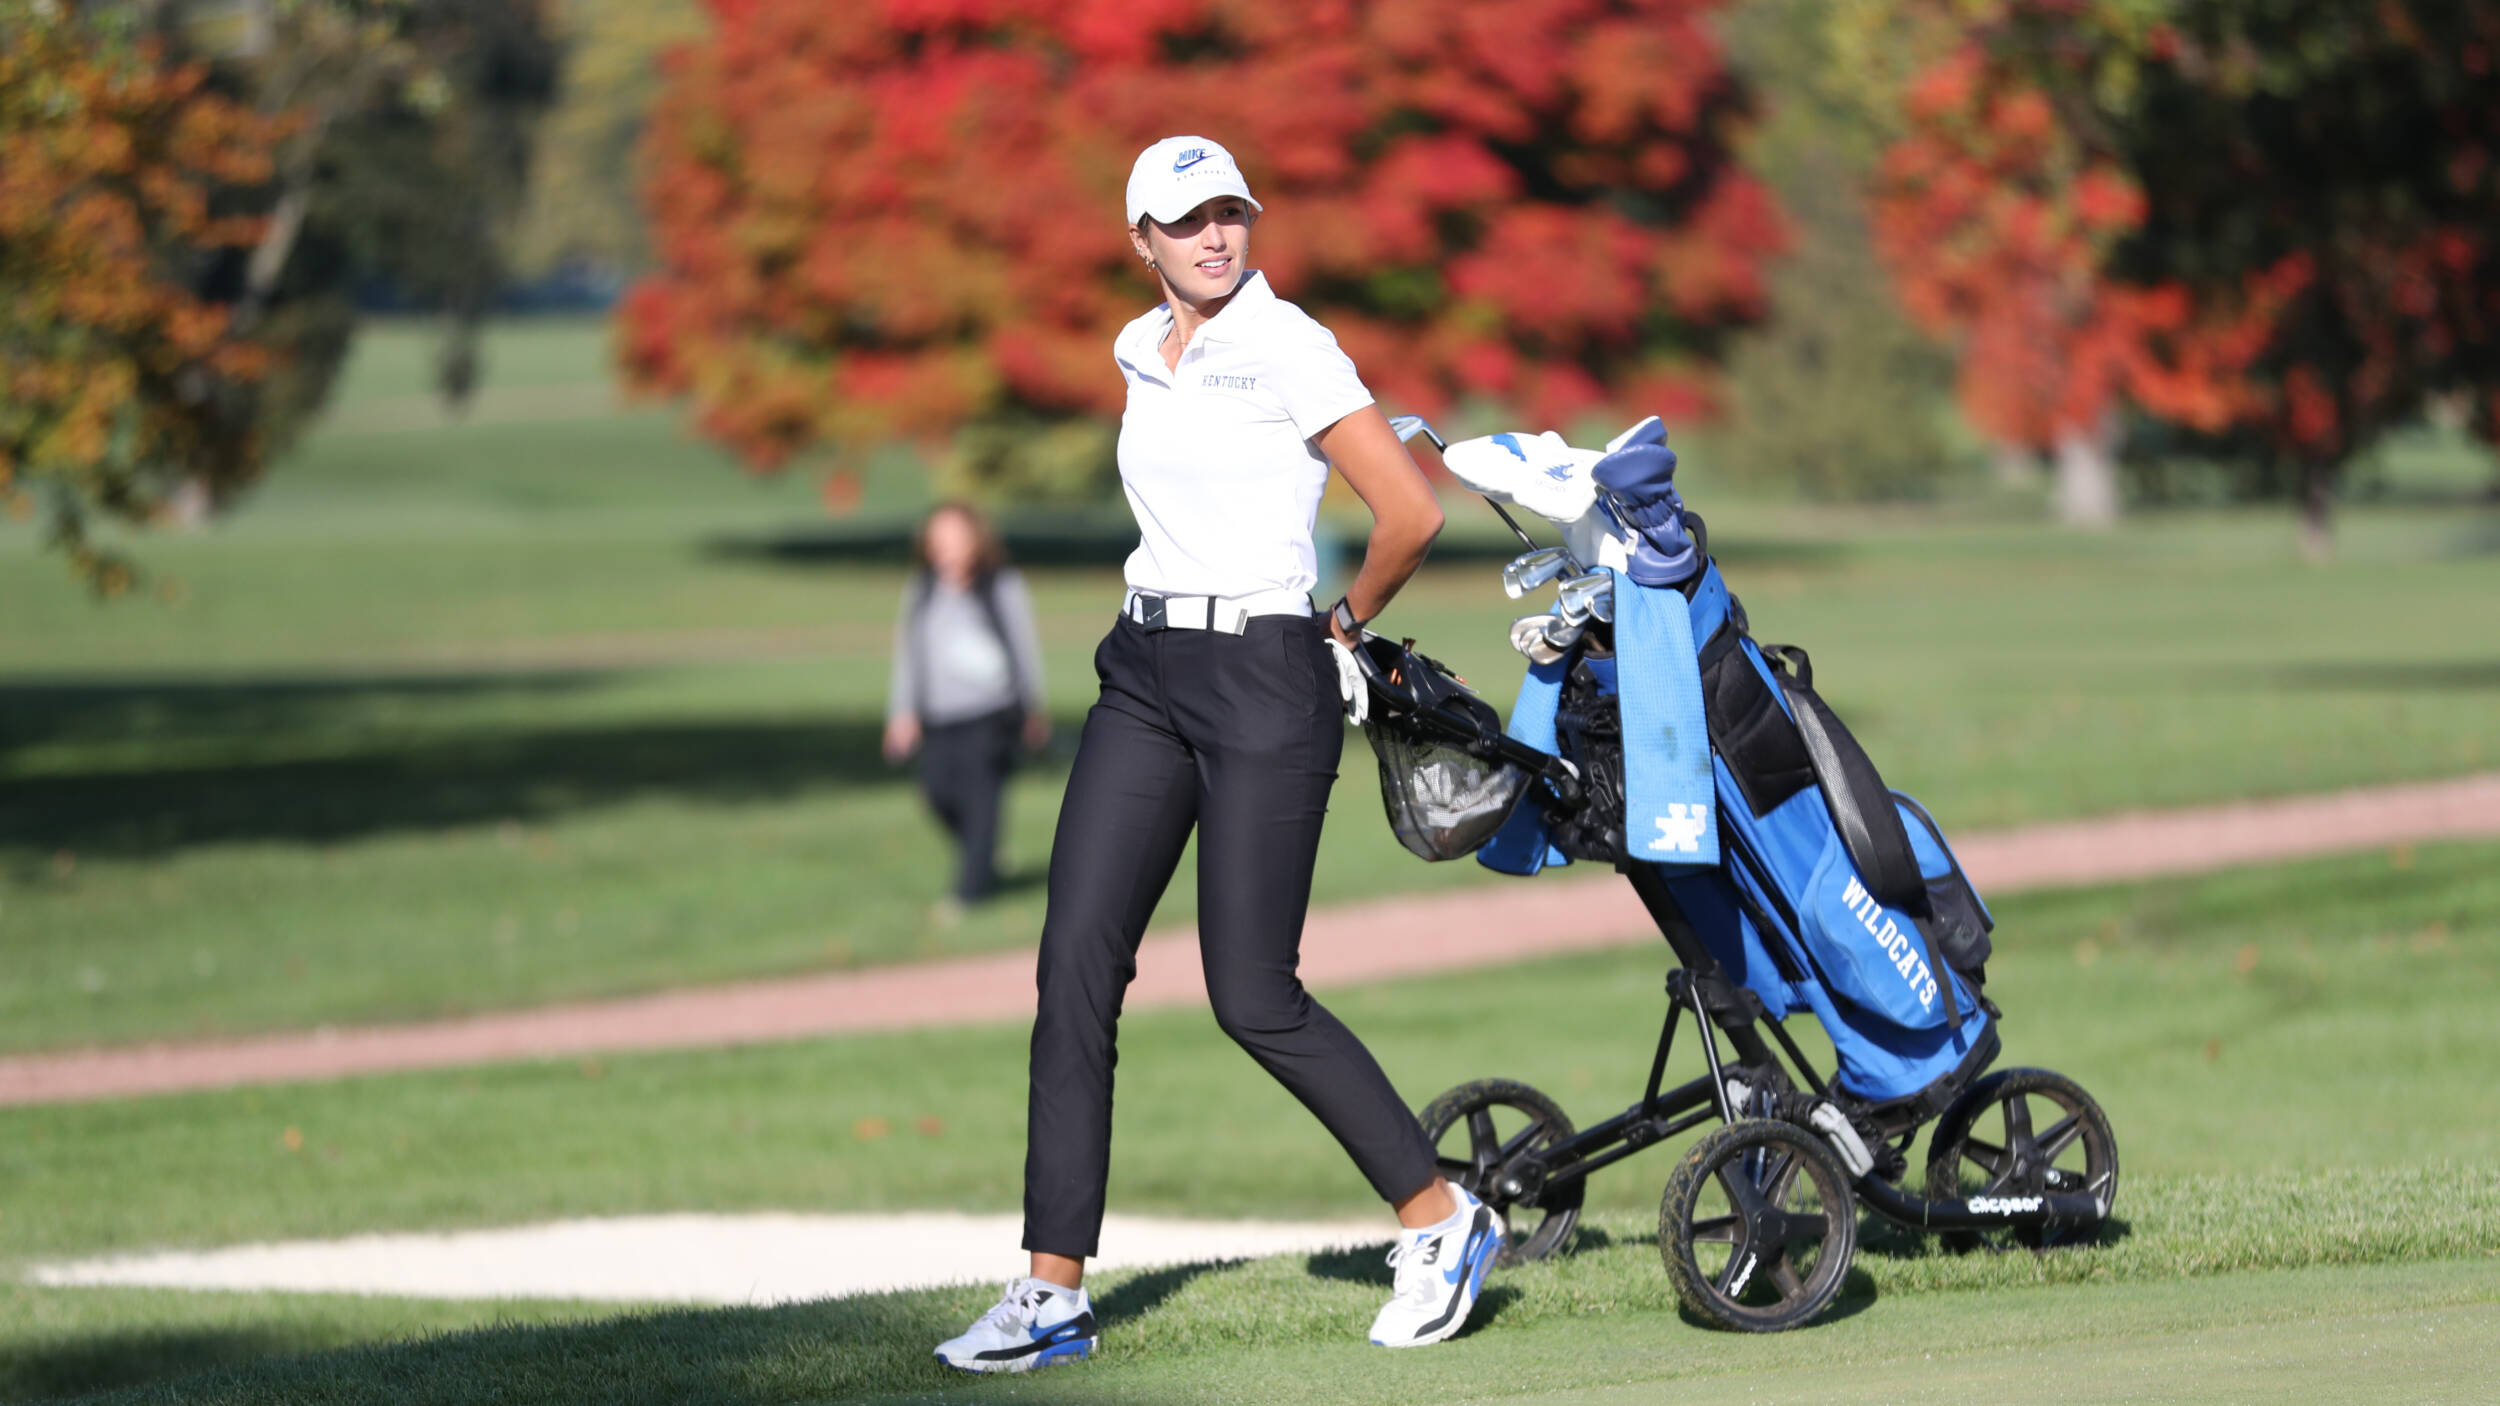 Cats Break School Record, Finds Second Place Before Final Round